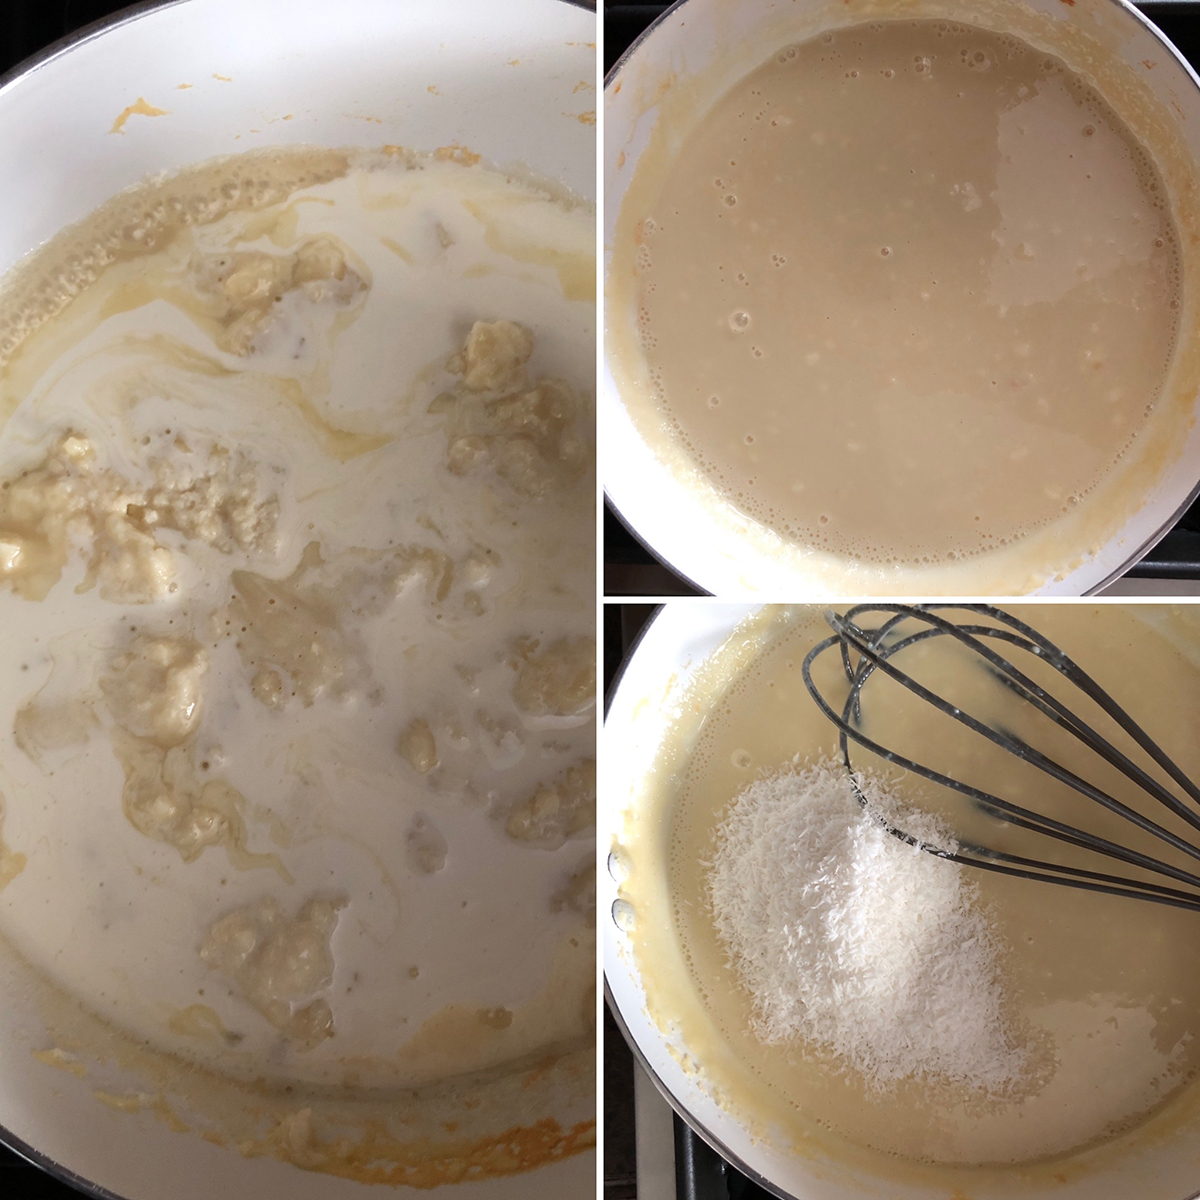 Step by step photos showing the cooking of cheese, condensed milk and desiccated coconut.